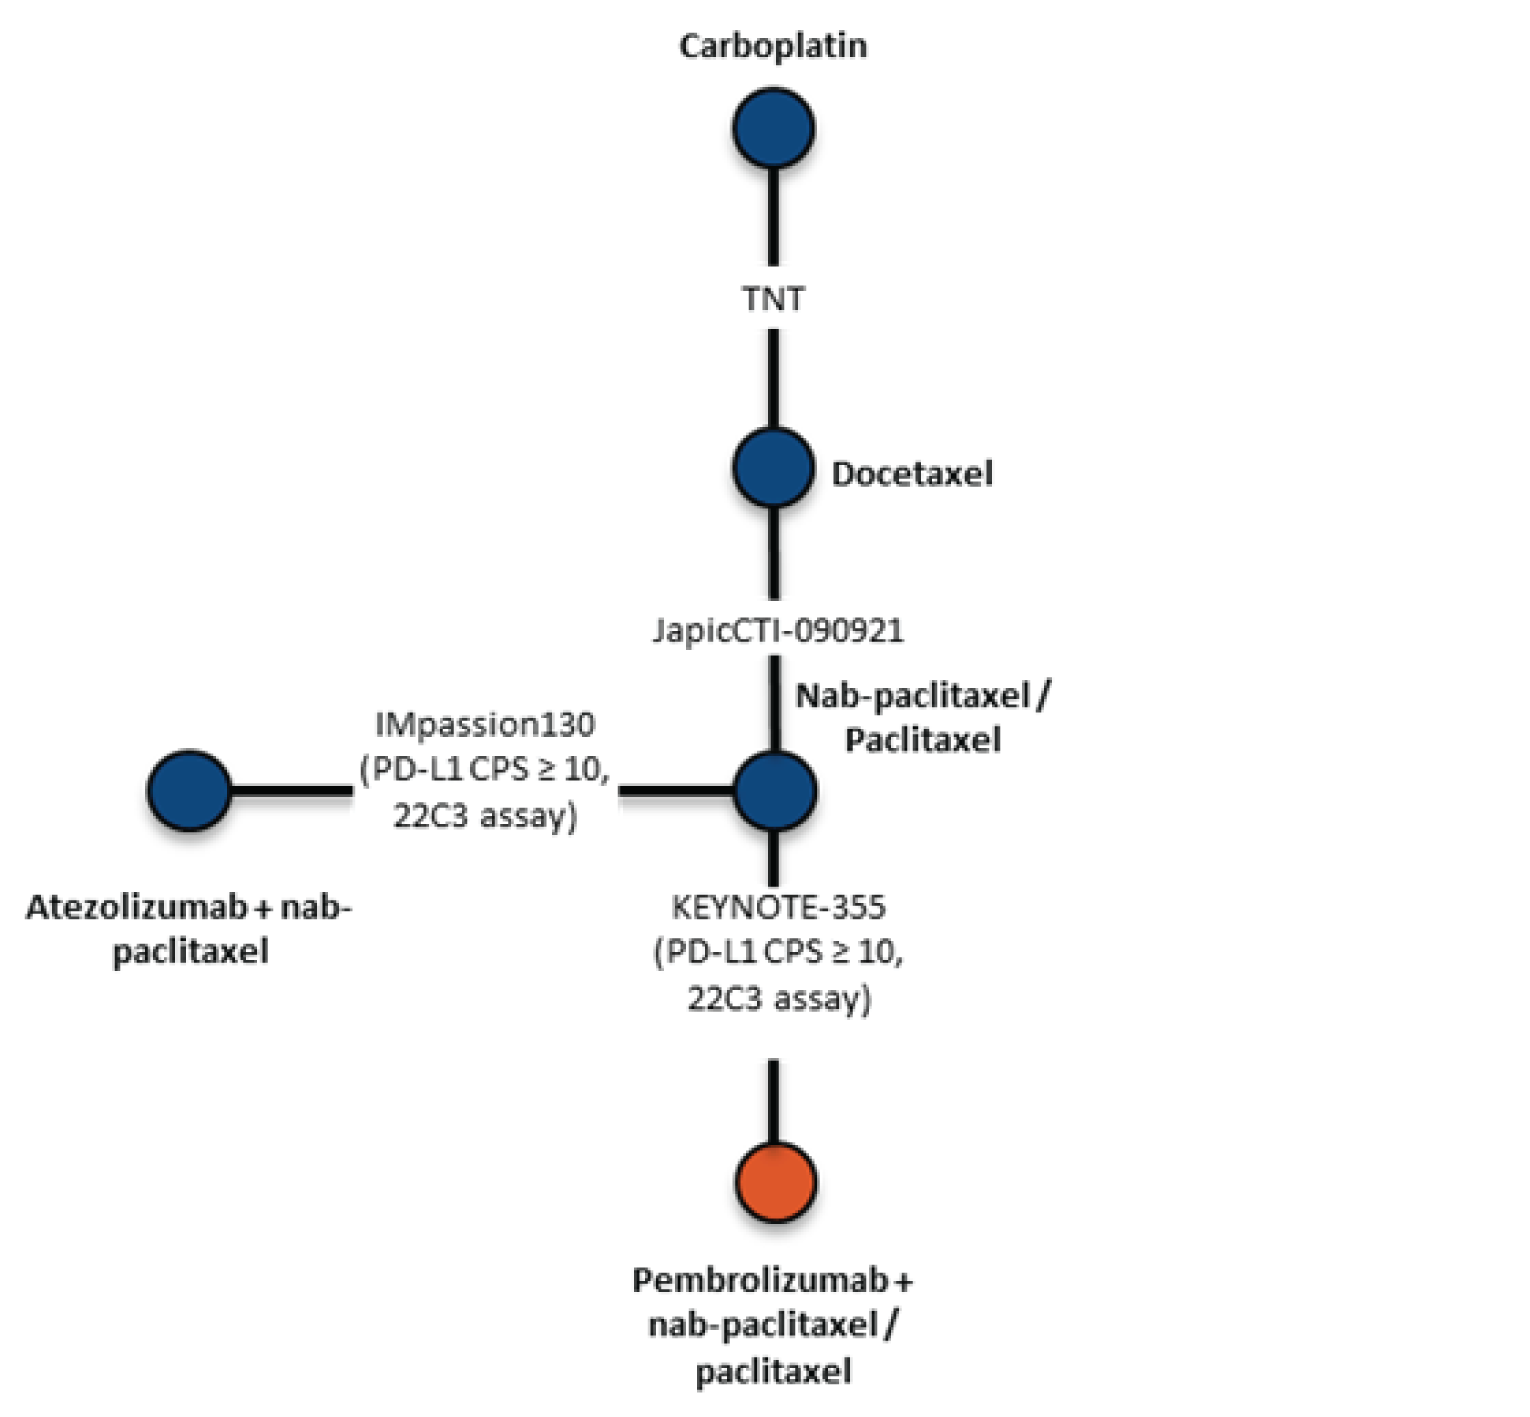 The figure shows the evidence network of all trials included in the network meta-analysis for overall survival outcome. The network includes carboplatin, docetaxel, atezolizumab plus nab-paclitaxel, nab-paclitaxel and/or paclitaxel, and pembrolizumab plus nab-paclitaxel and/or paclitaxel.